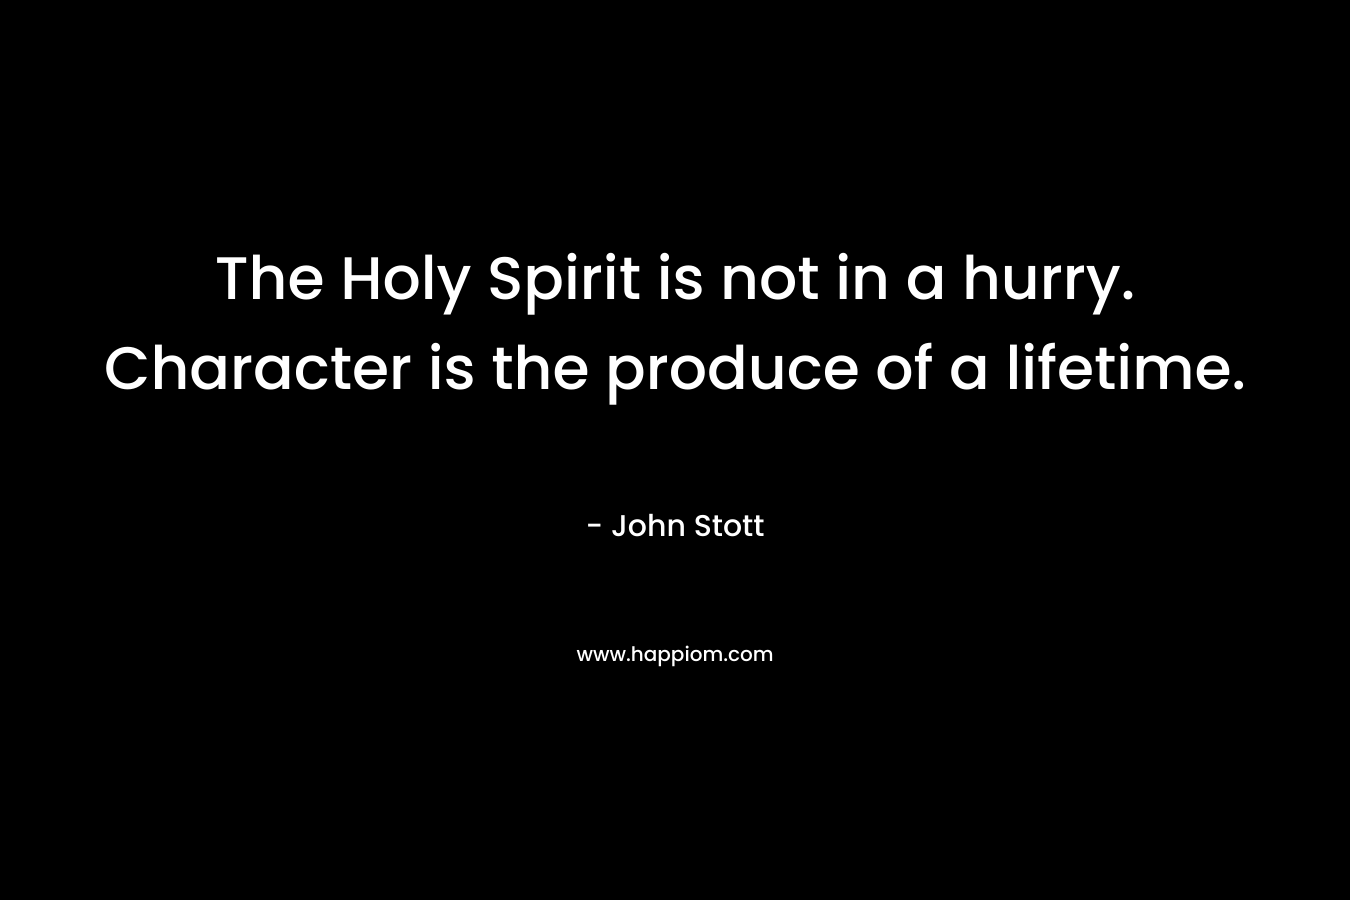 The Holy Spirit is not in a hurry. Character is the produce of a lifetime.